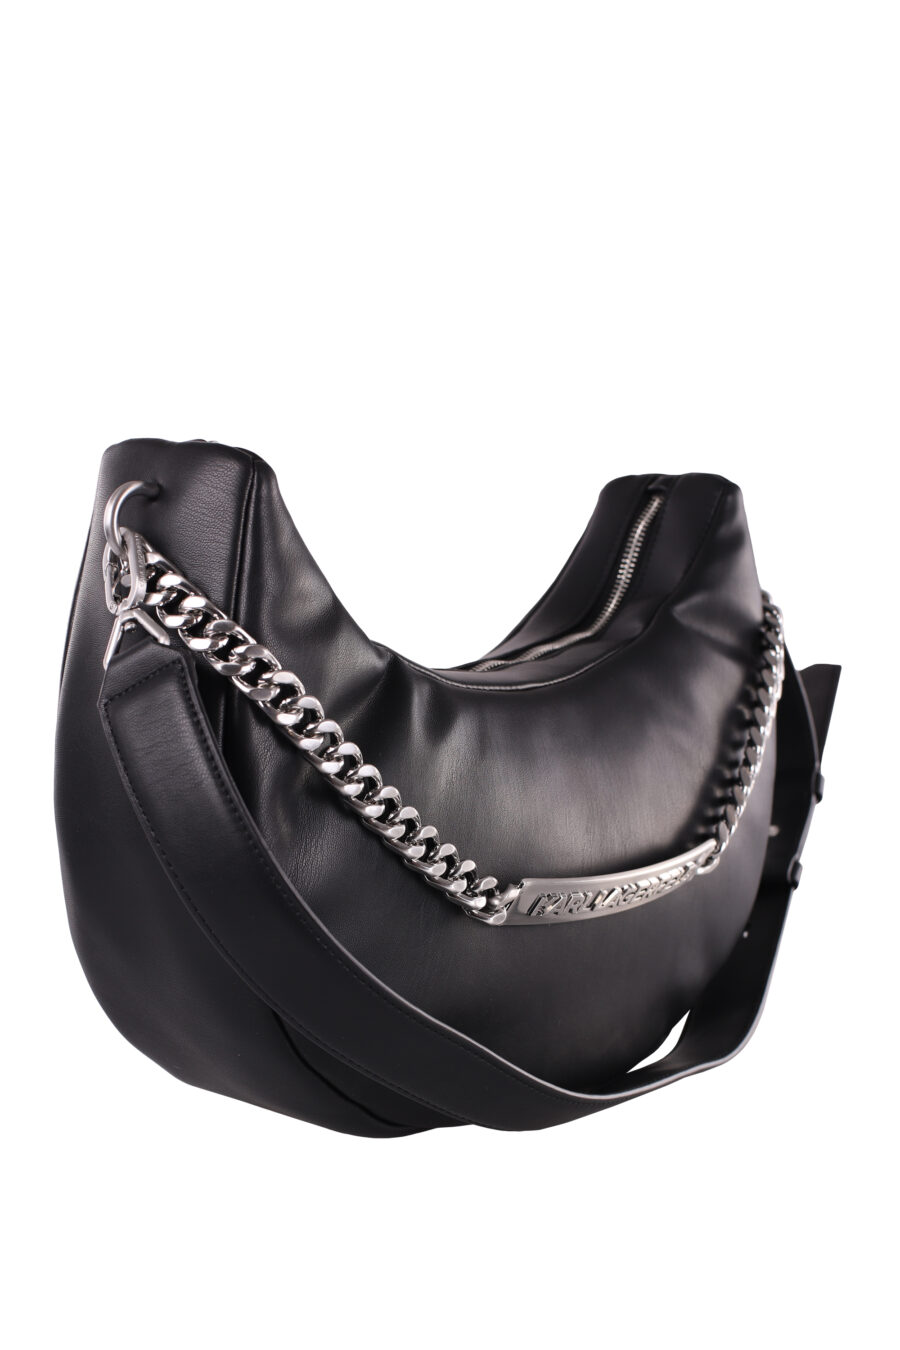 Black hobo bag with silver plated chain - IMG 6046